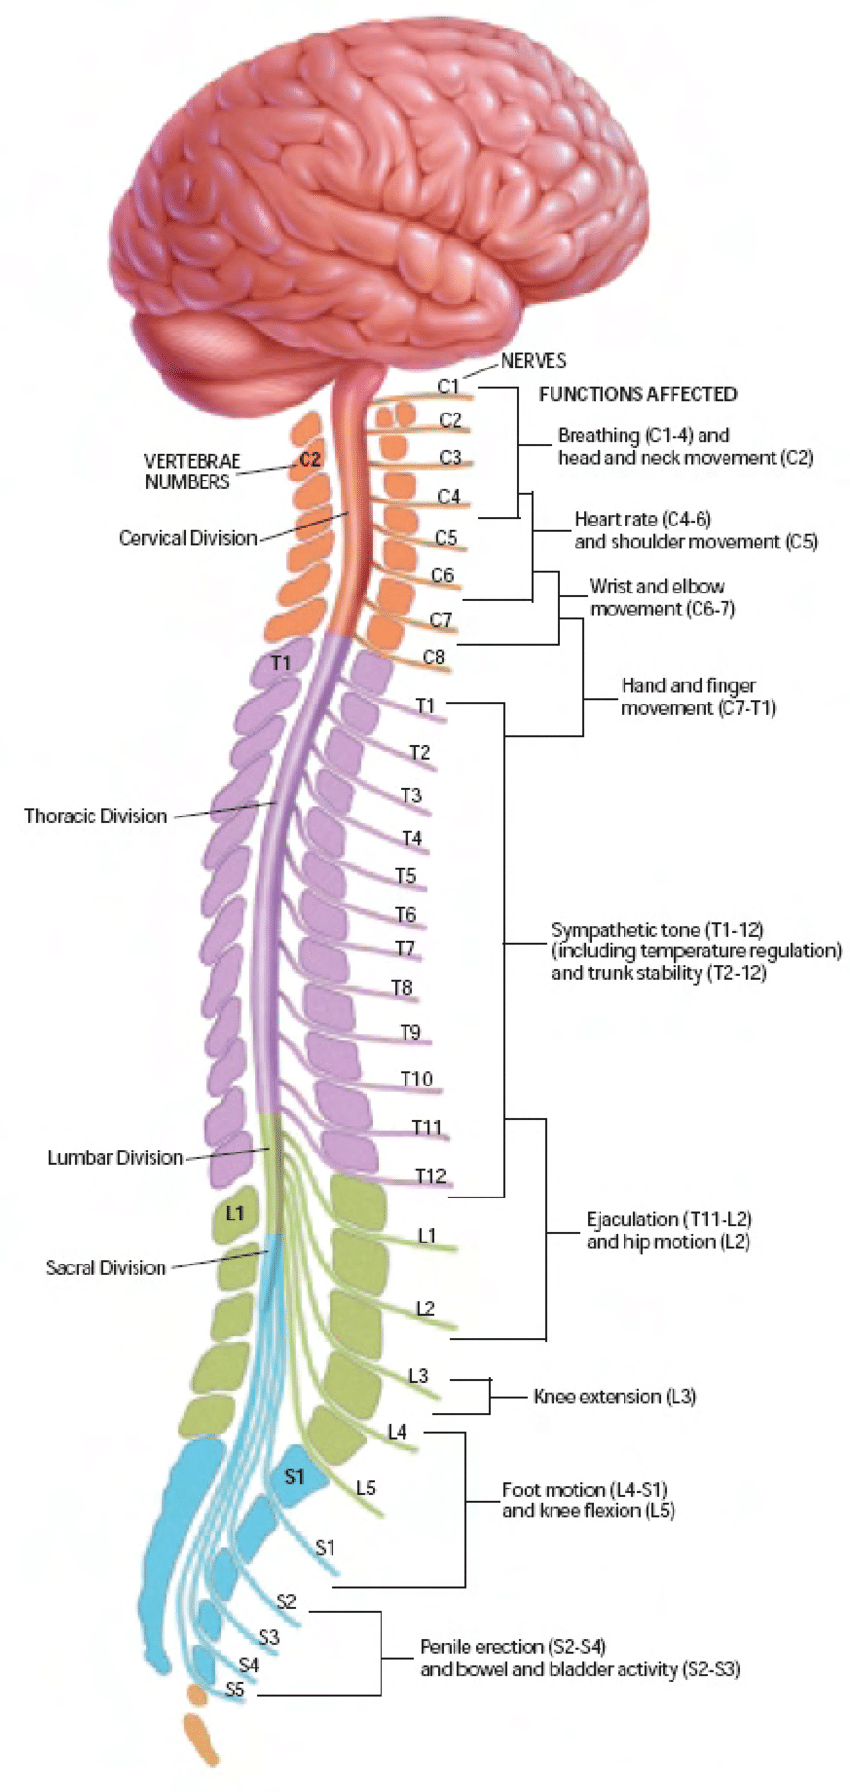 Spinal Cord Diagram The Four Divisions Of The Spinal Cord Cervical Thoracic Lumbar